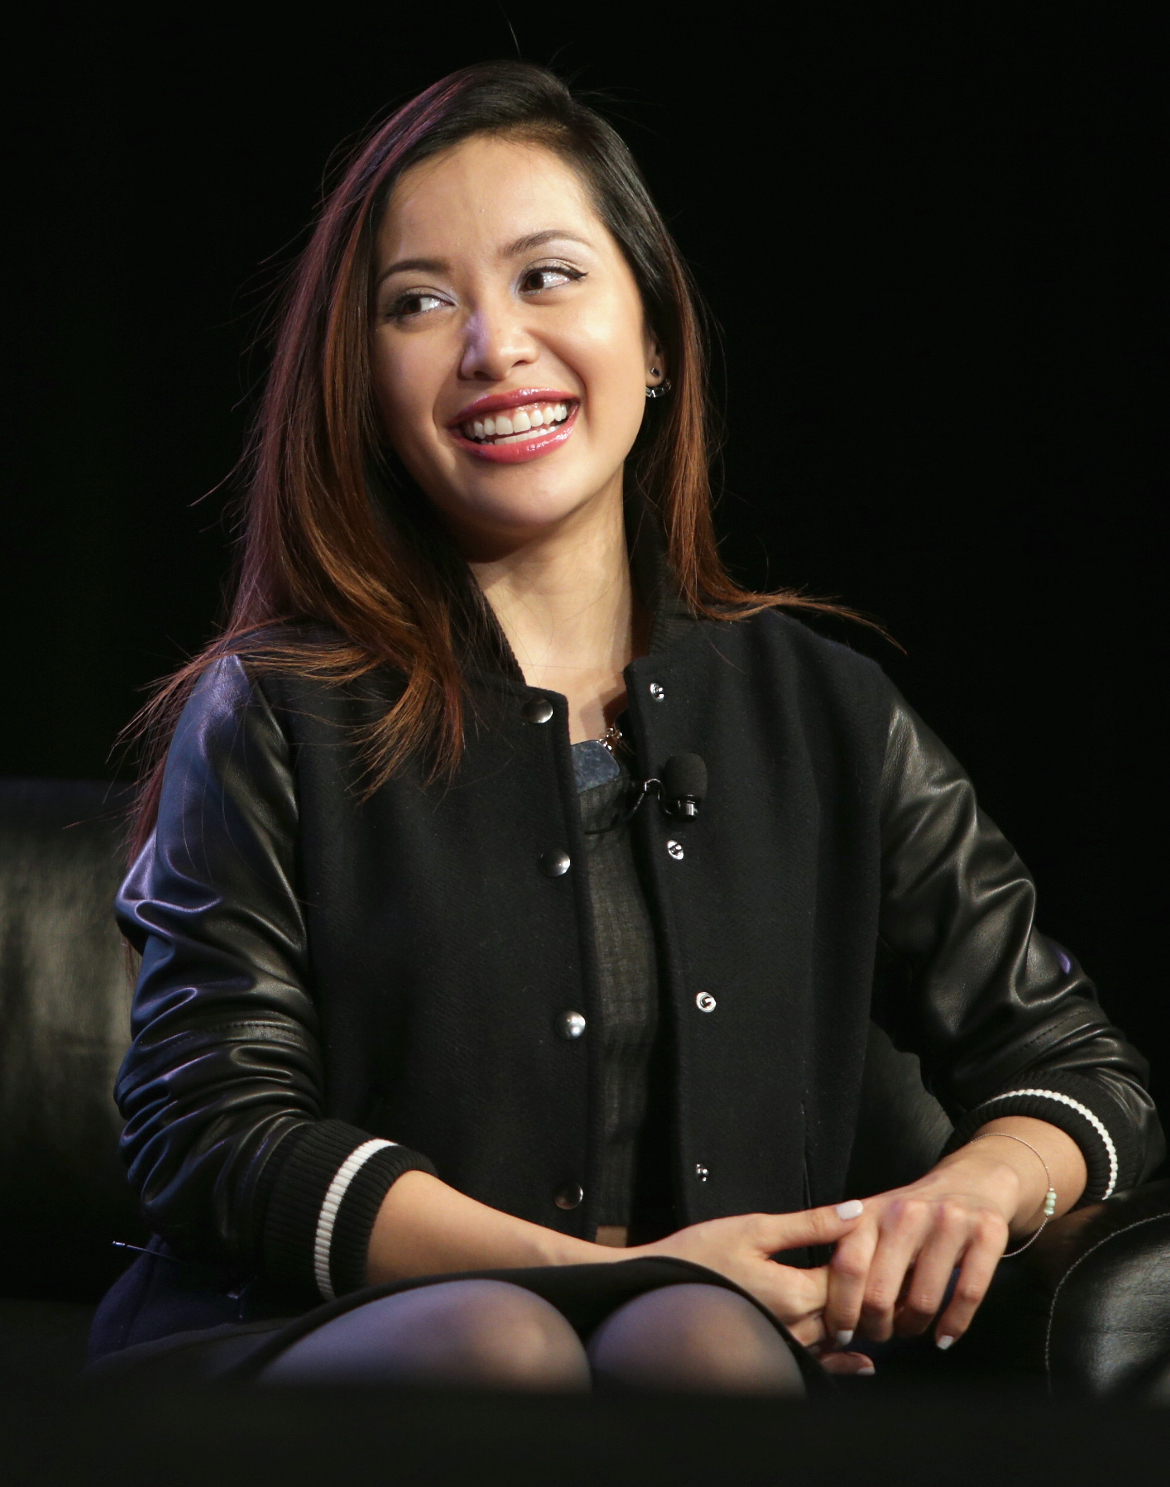 Michelle Phan, a makeup guru who has built a mini empire off her 7.8 million YouTube subscribers, launched a network of like-minded video creators called Icon earlier this year.